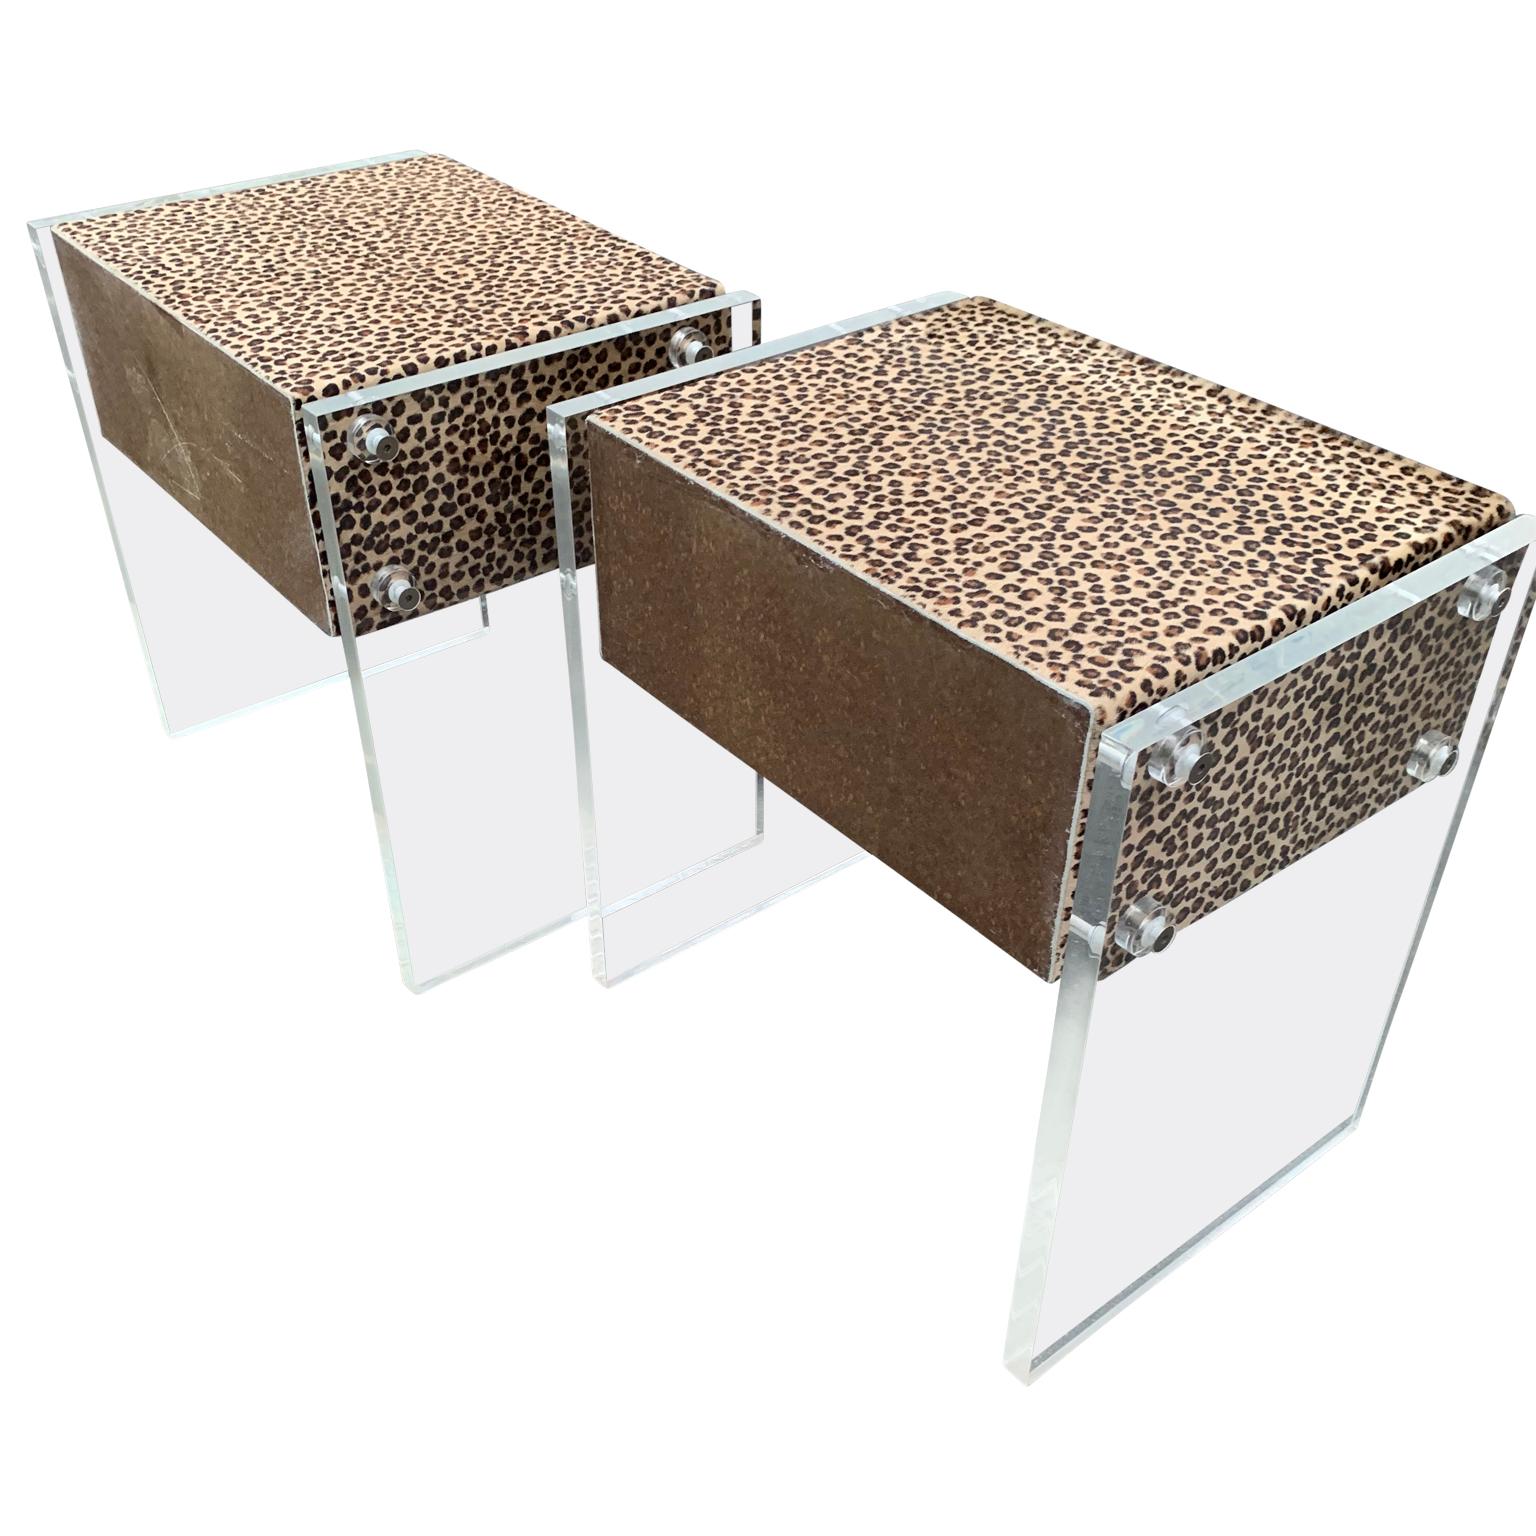 Pair of Faux Cheetah Skin Upholstered Nightstands with Lucite Side Panels (20. Jahrhundert)